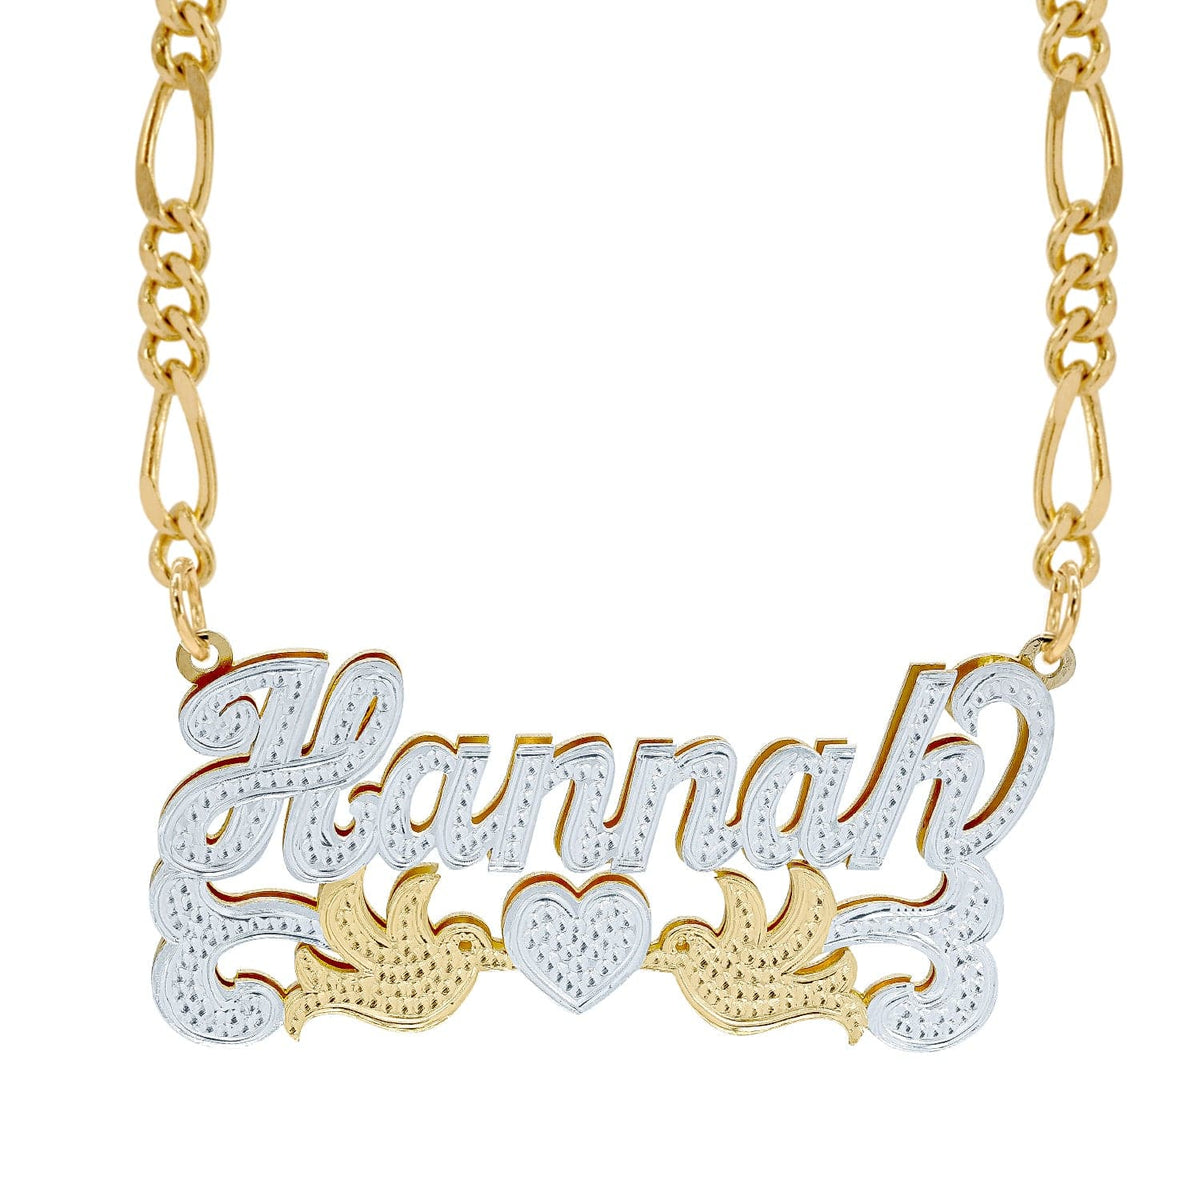 Two-Tone. Sterling Silver / Figaro chain Double Nameplate Necklace w/ Love Birds and Centered Heart